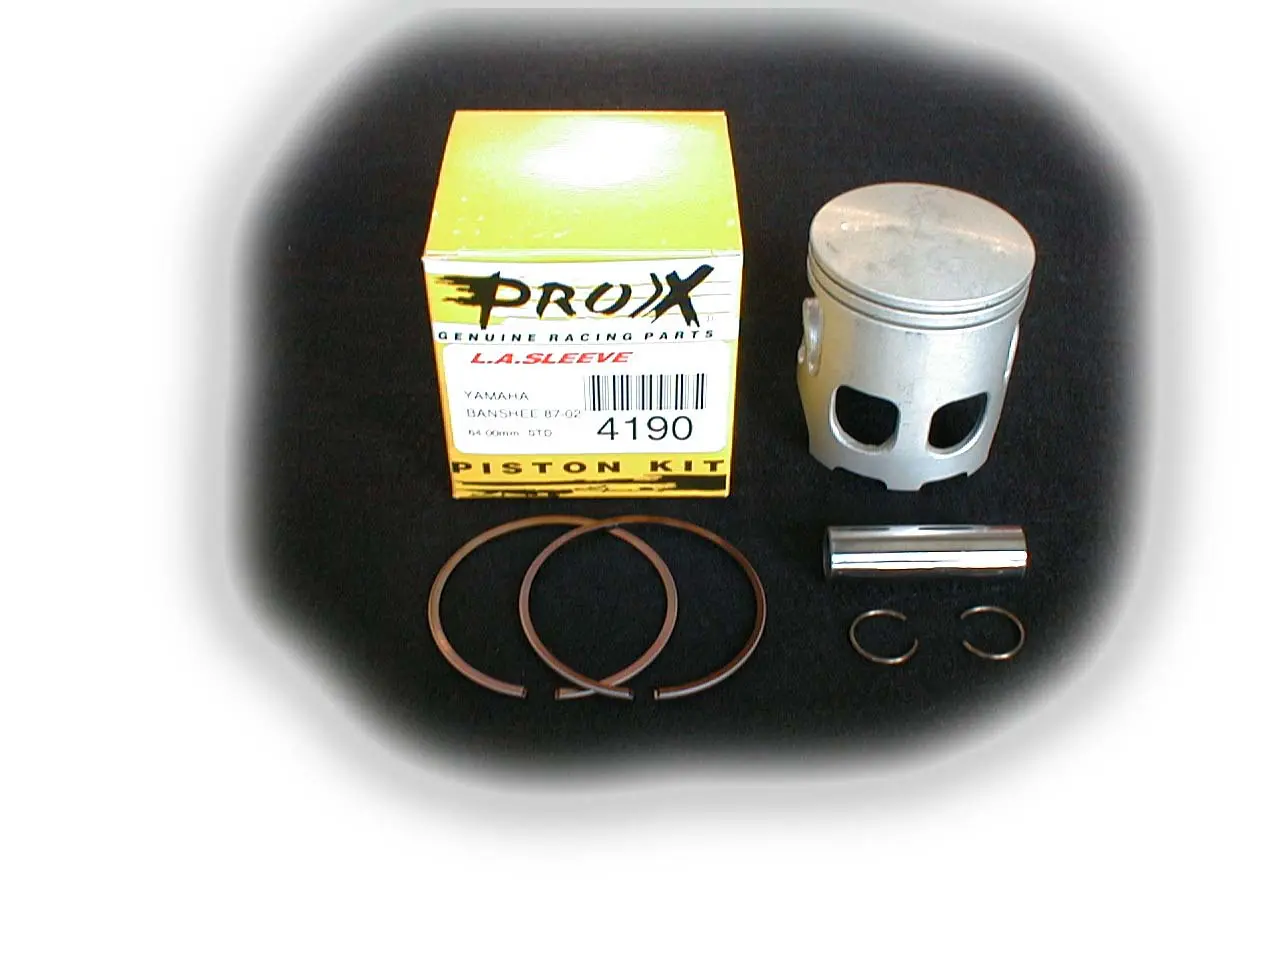 The PRO X, Yamaha Banshee Piston Kit, Part 16-5700 includes a piston and a piston ring.